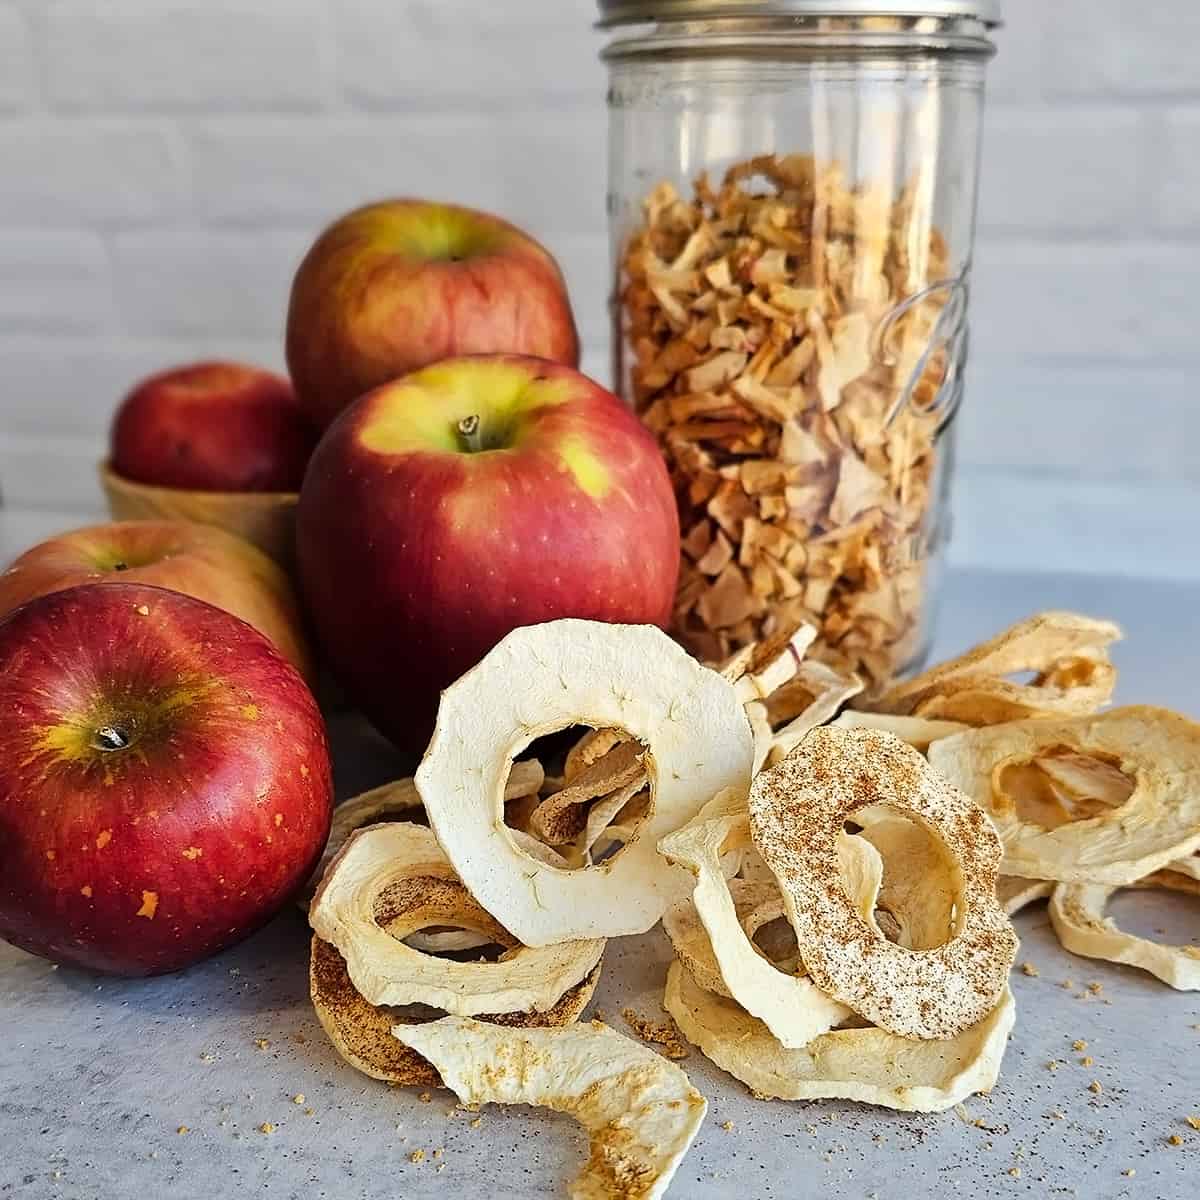 Fresh apples, dried apple rings and a jar of dried apple pieces on the counter.